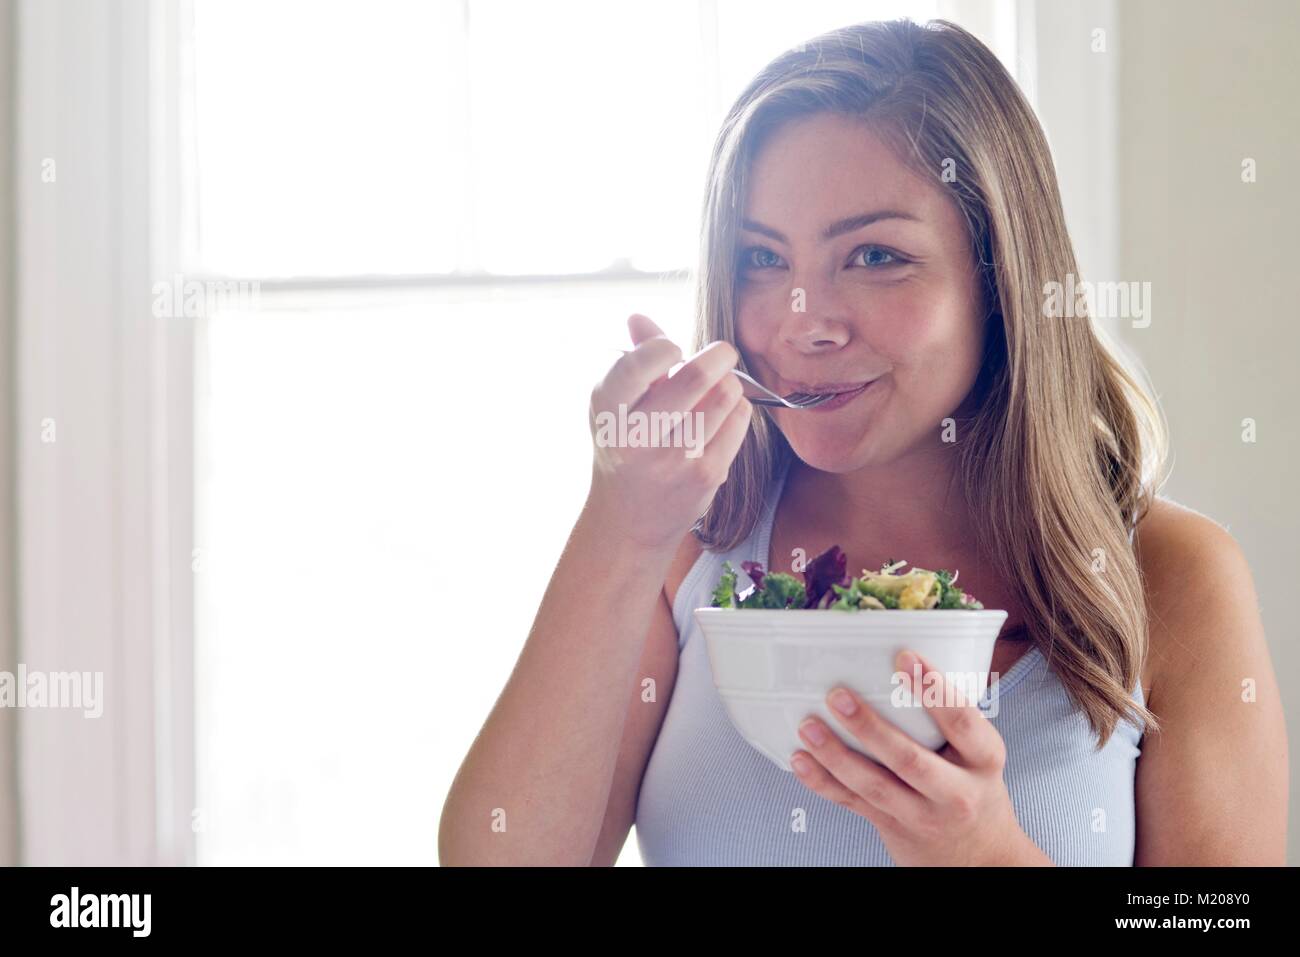 Portrait of young woman eating salad. Stock Photo